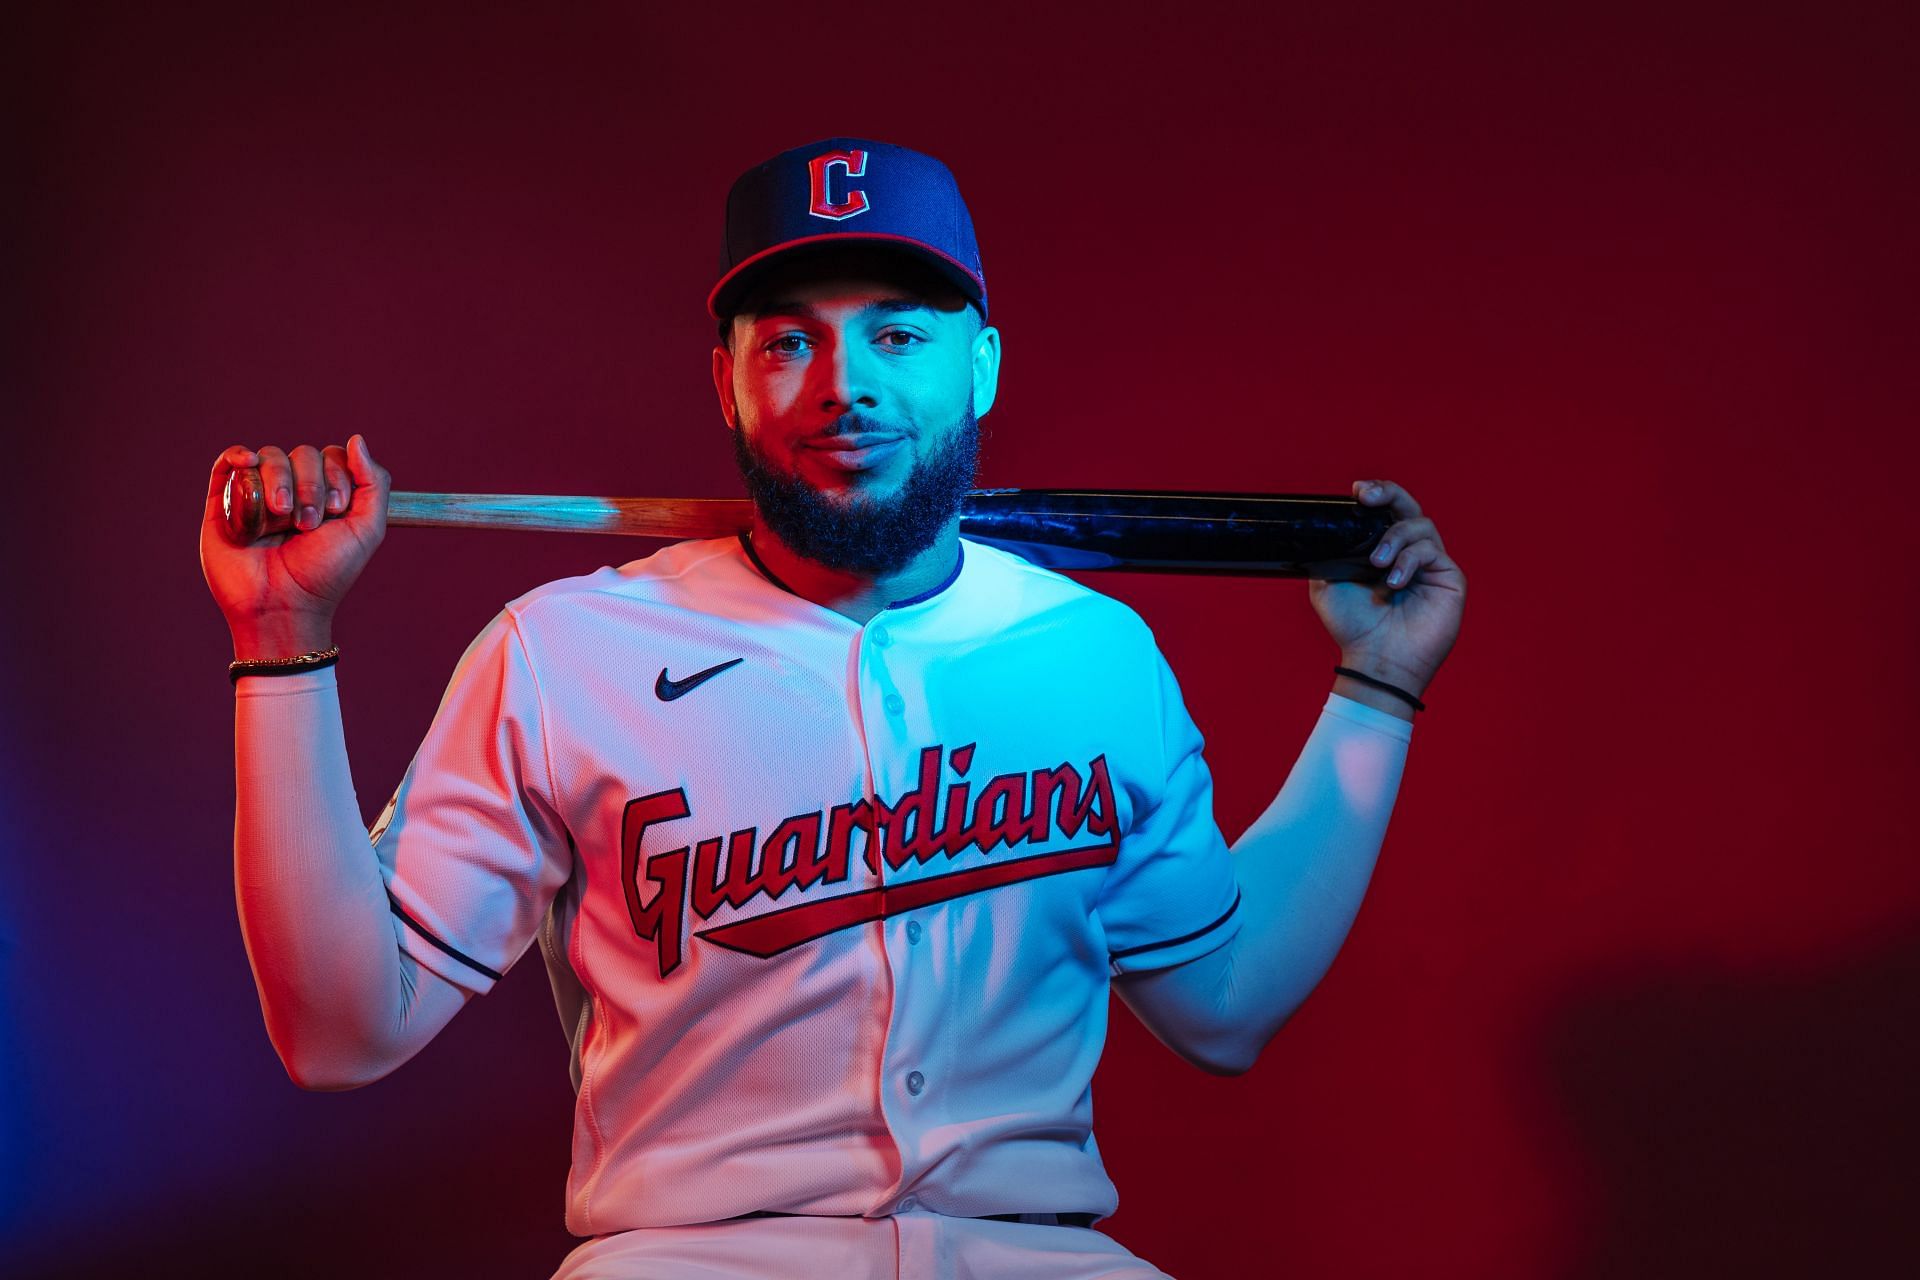 George Valera #76 of the Cleveland Guardians poses for a photo during media day at Goodyear Ballpark